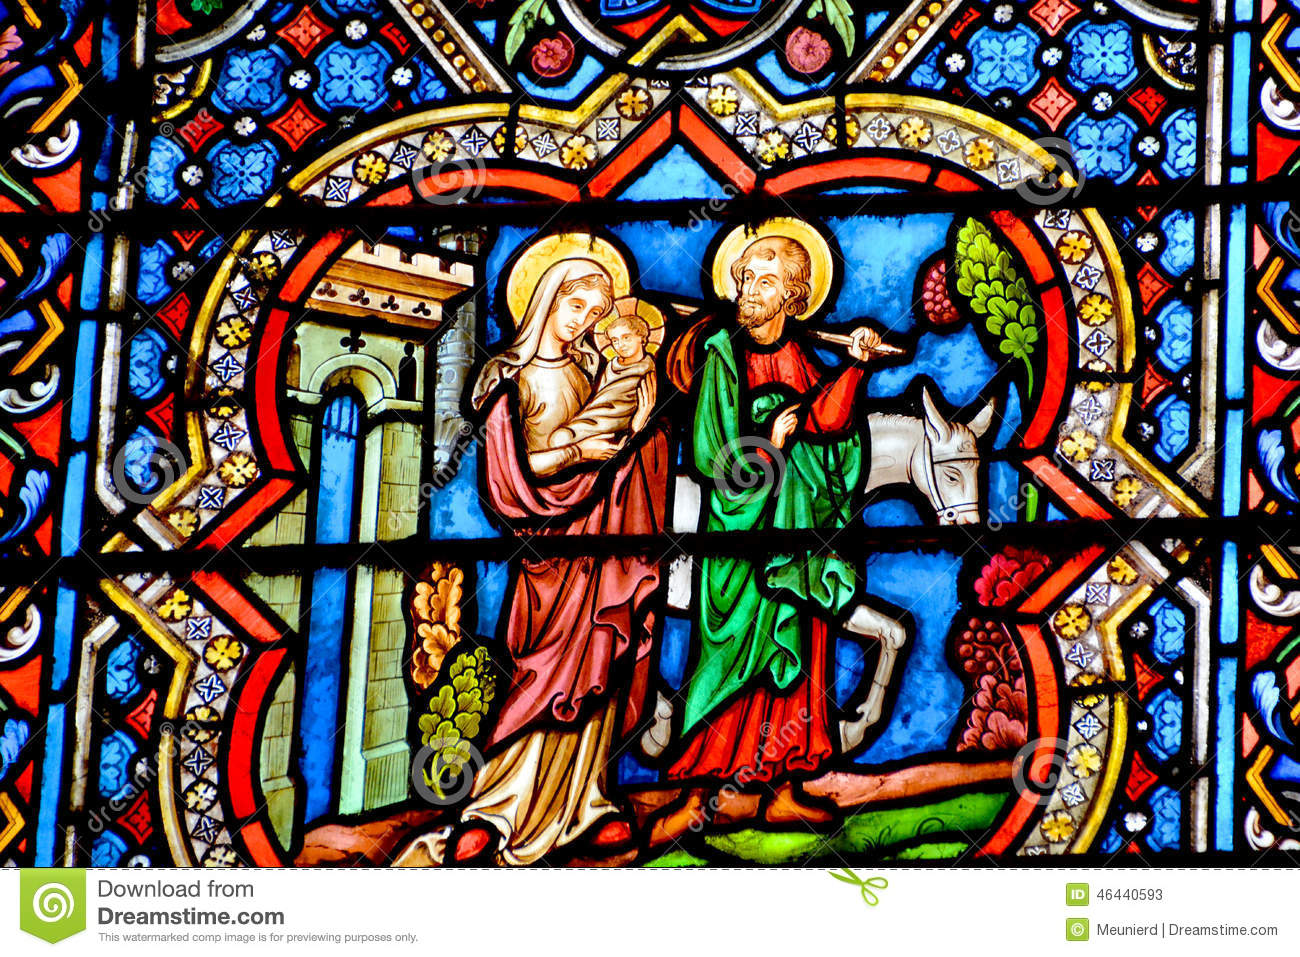 https://thumbs.dreamstime.com/z/stained-glass-window-notre-dame-cathedral-paris-france-october-france-october-one-most-famous-landmarks-46440593.jpg